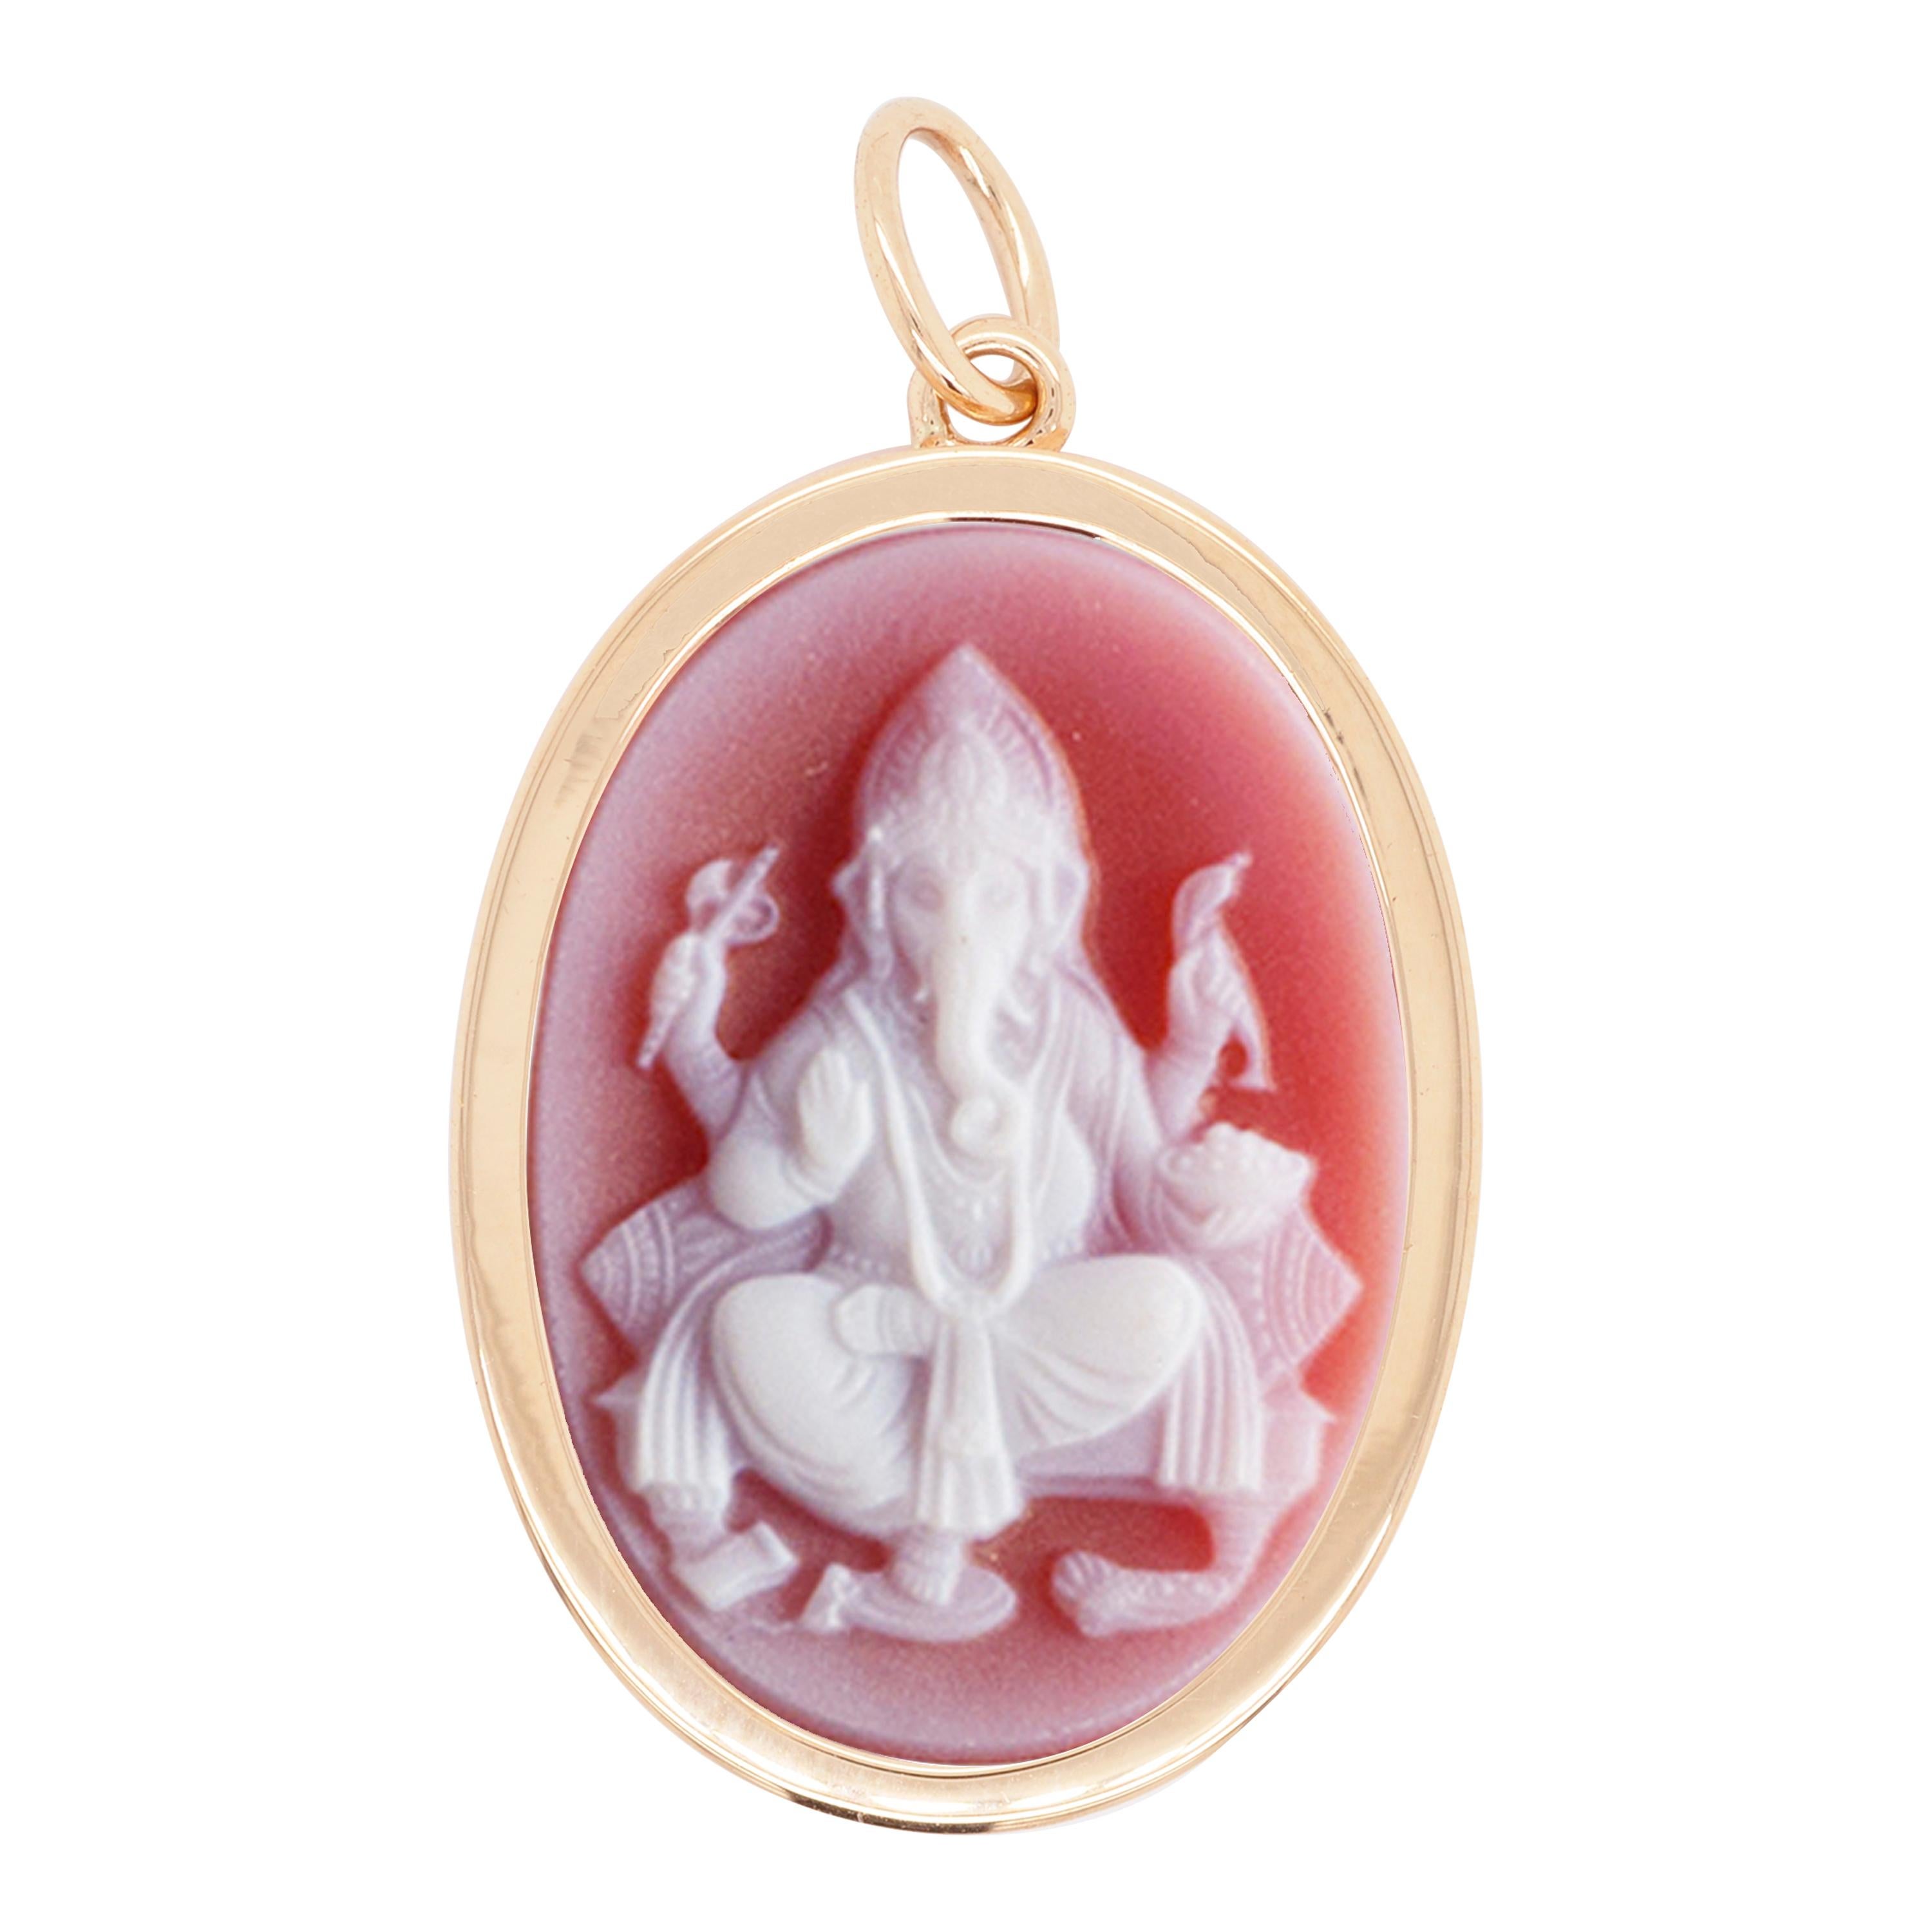 Reversible 18 karat yellow gold ganesha agate cameo om pendant necklace.

Get two pendants in one with this reversible necklace in 18 karat yellow gold ganesha agate cameo om pendant necklace. The pendant is set in 18 karat gold features ganesha